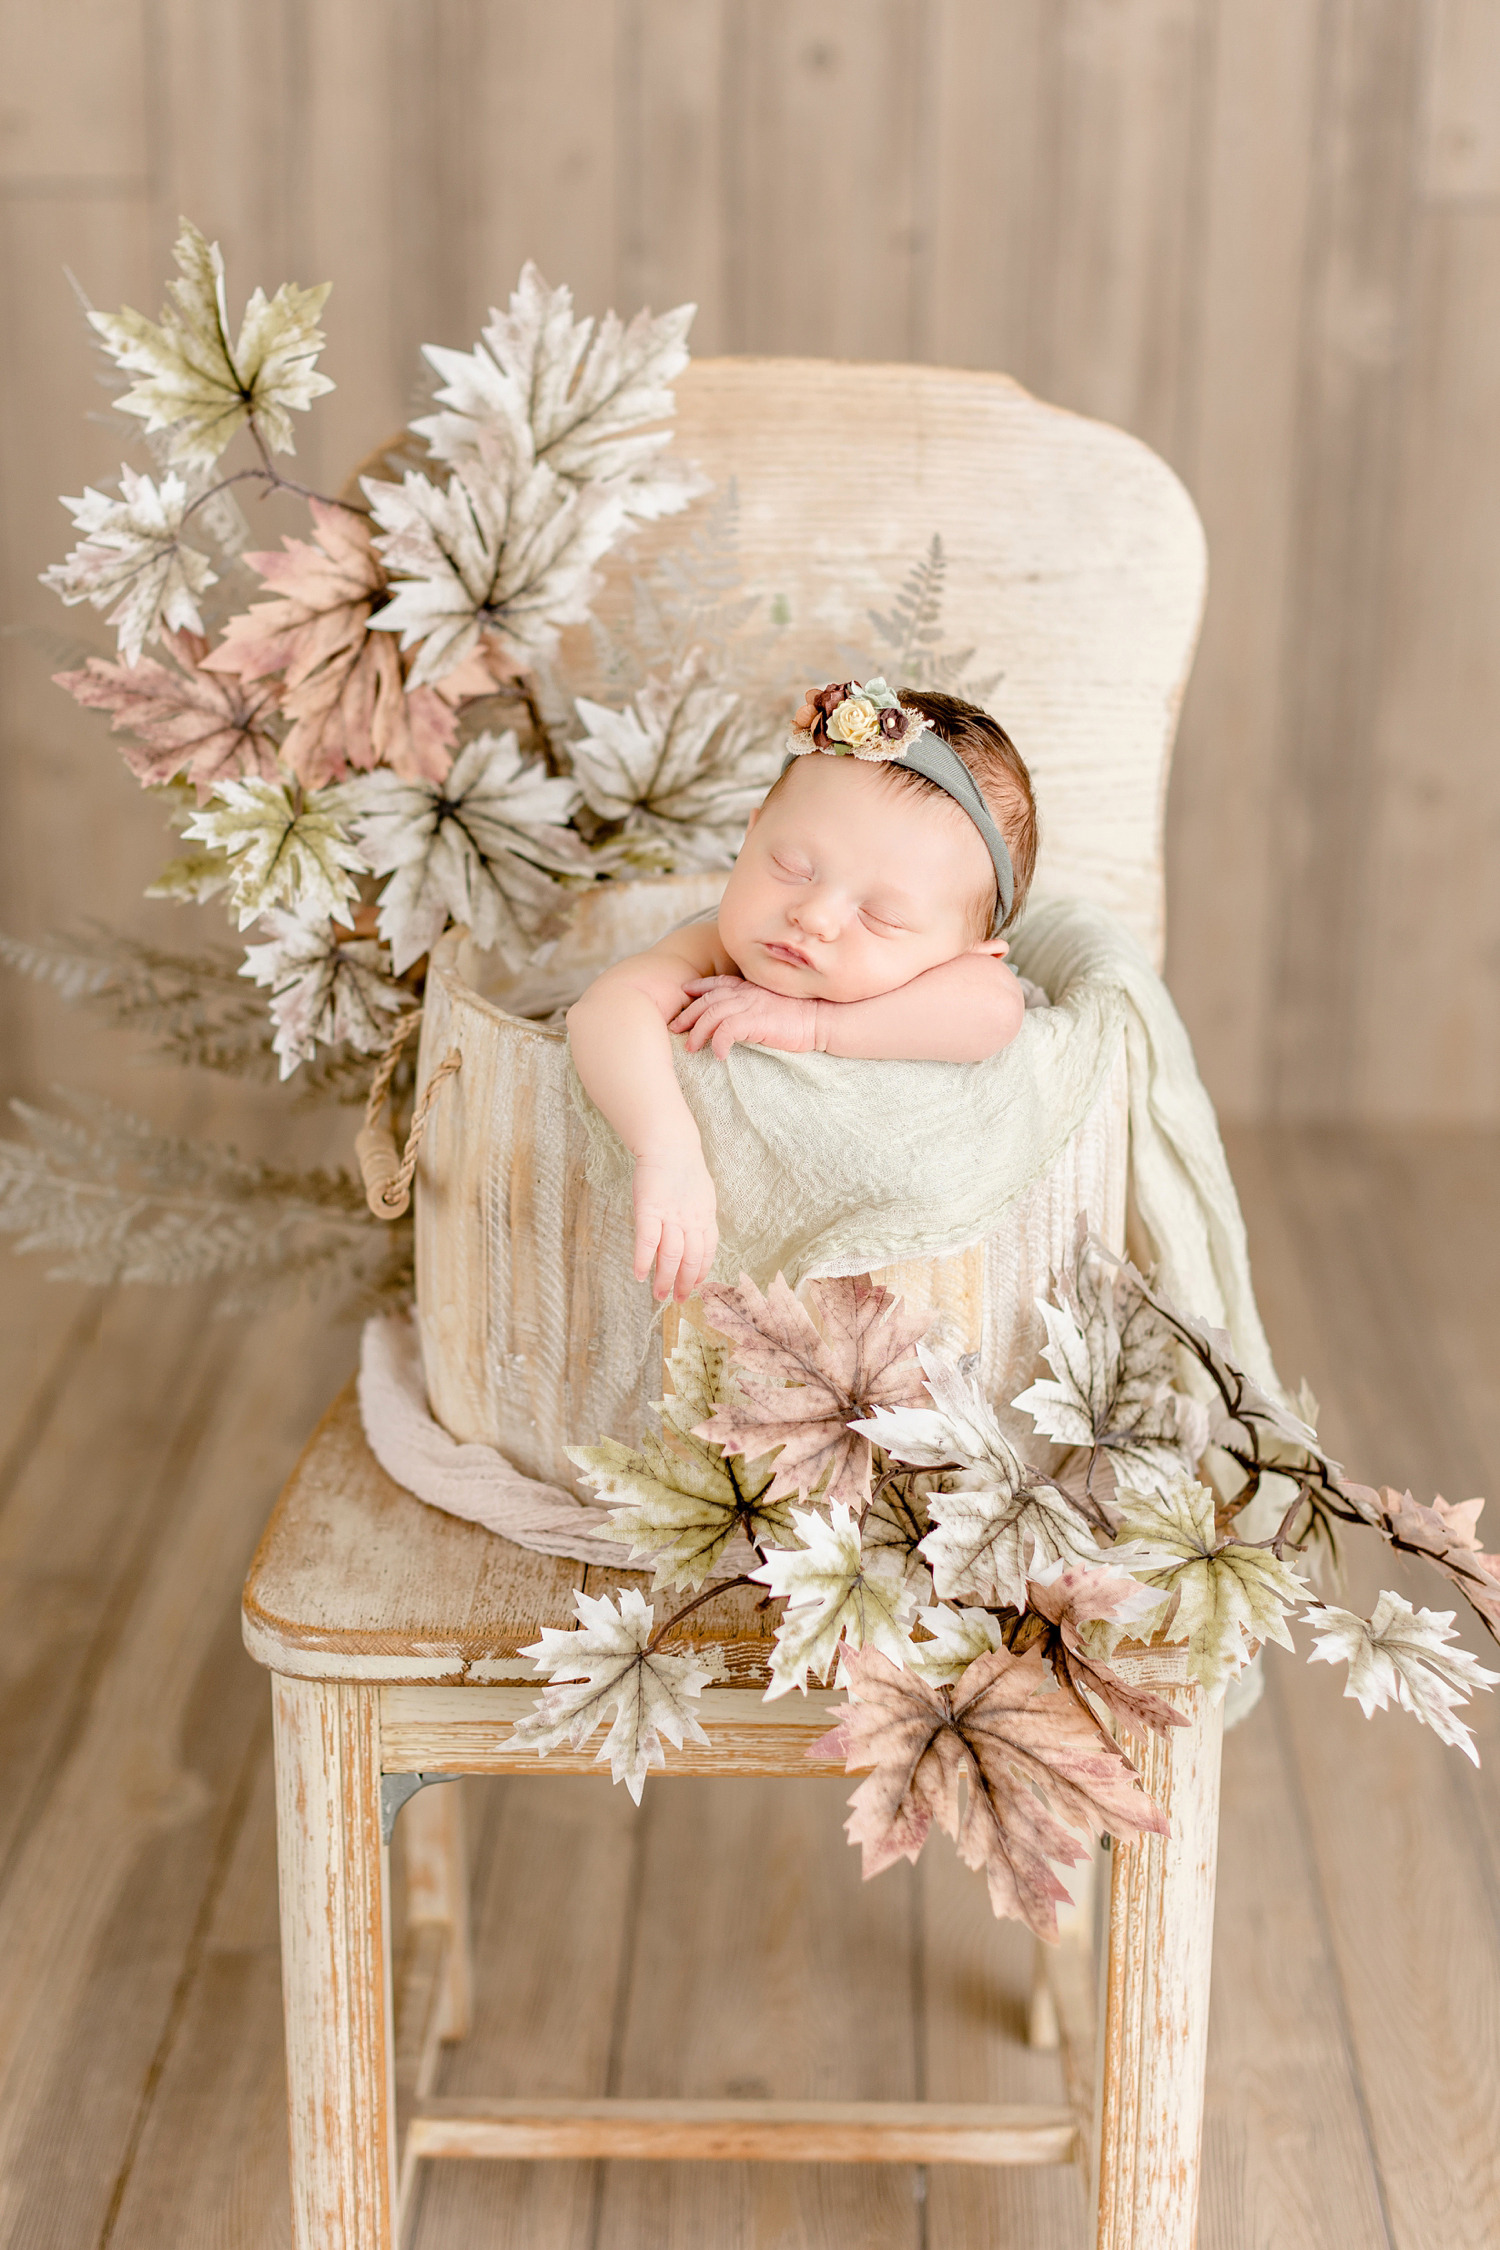 Baby Delilah nestled in a warm neutral bucket on a wooden chair surrounded by light neutral leaves | CB Studio